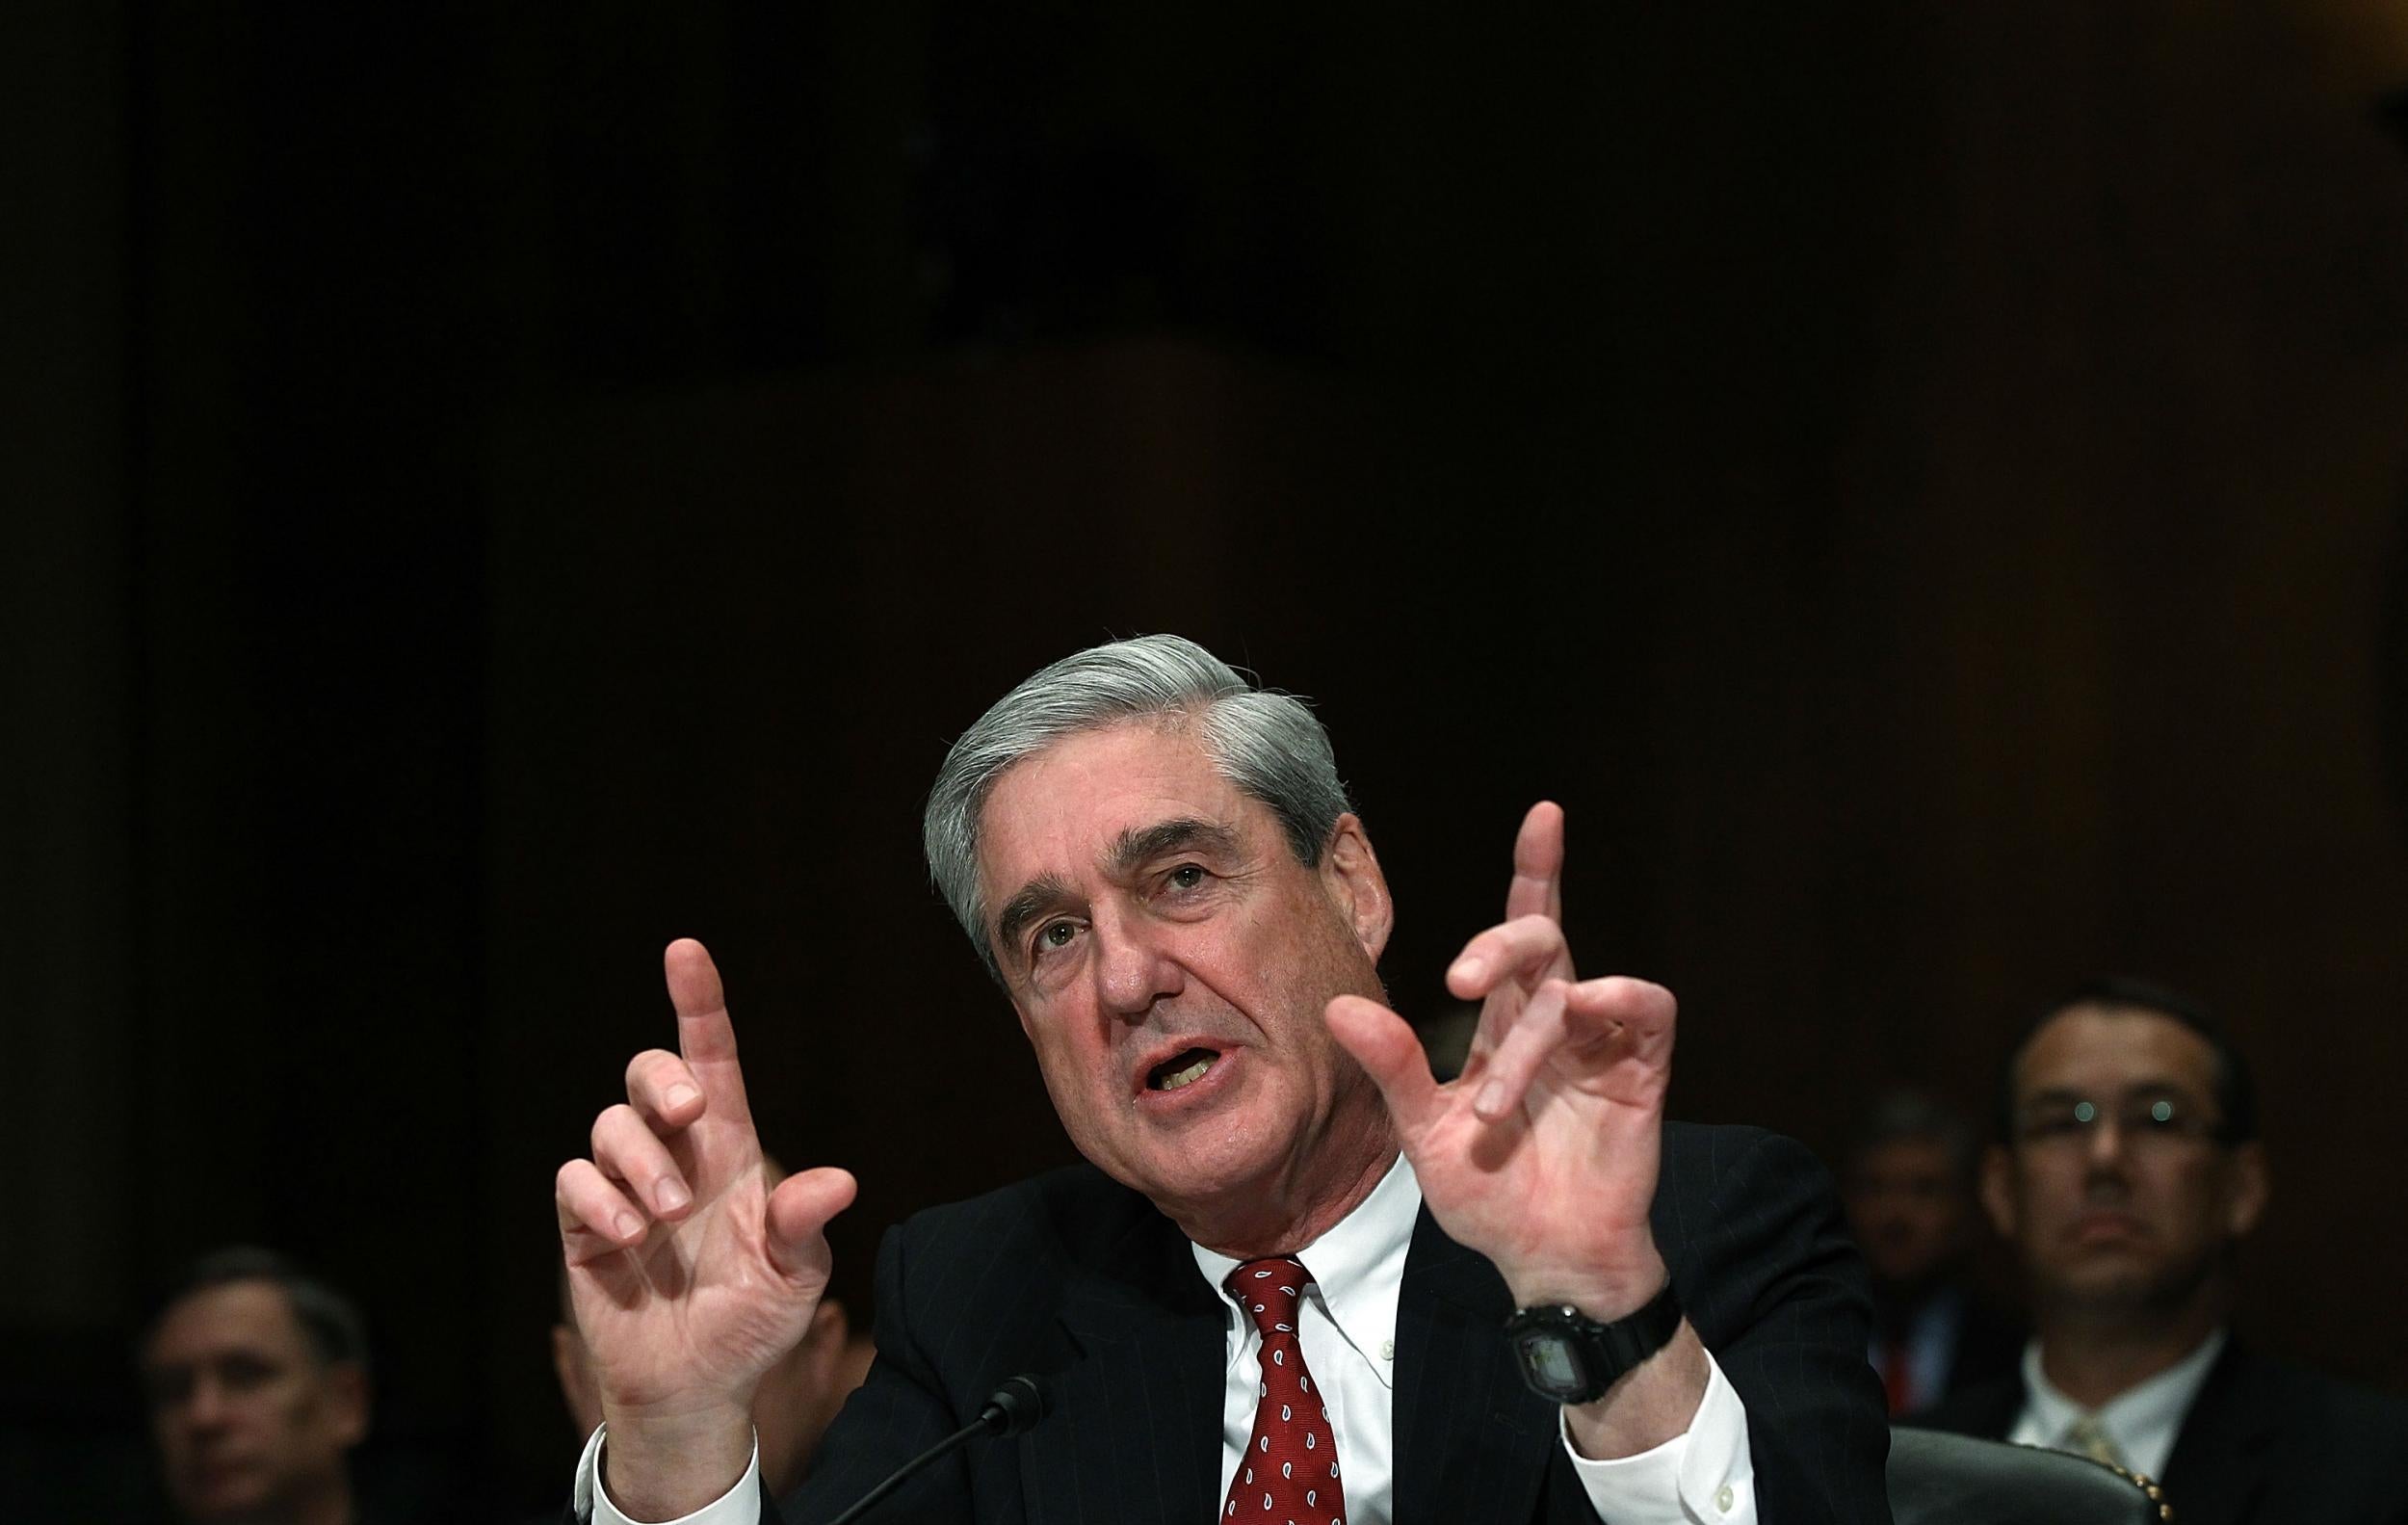 Mr Mueller has yet to make any public comments about his probe